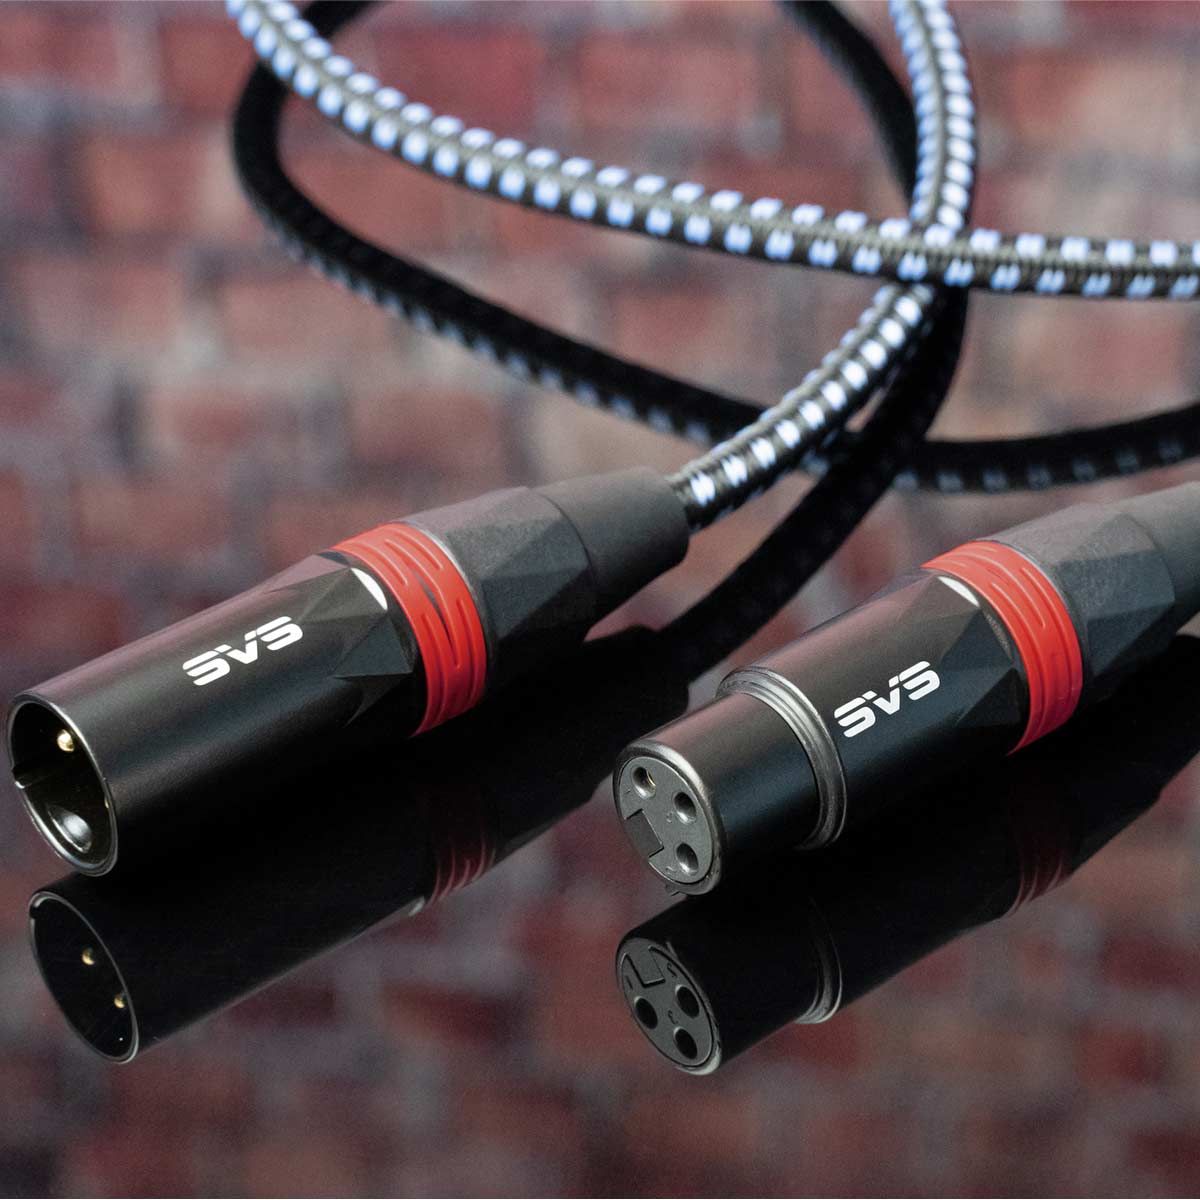 SVS SoundPath XLR Balanced XLR Audio Cable - red terminations on table